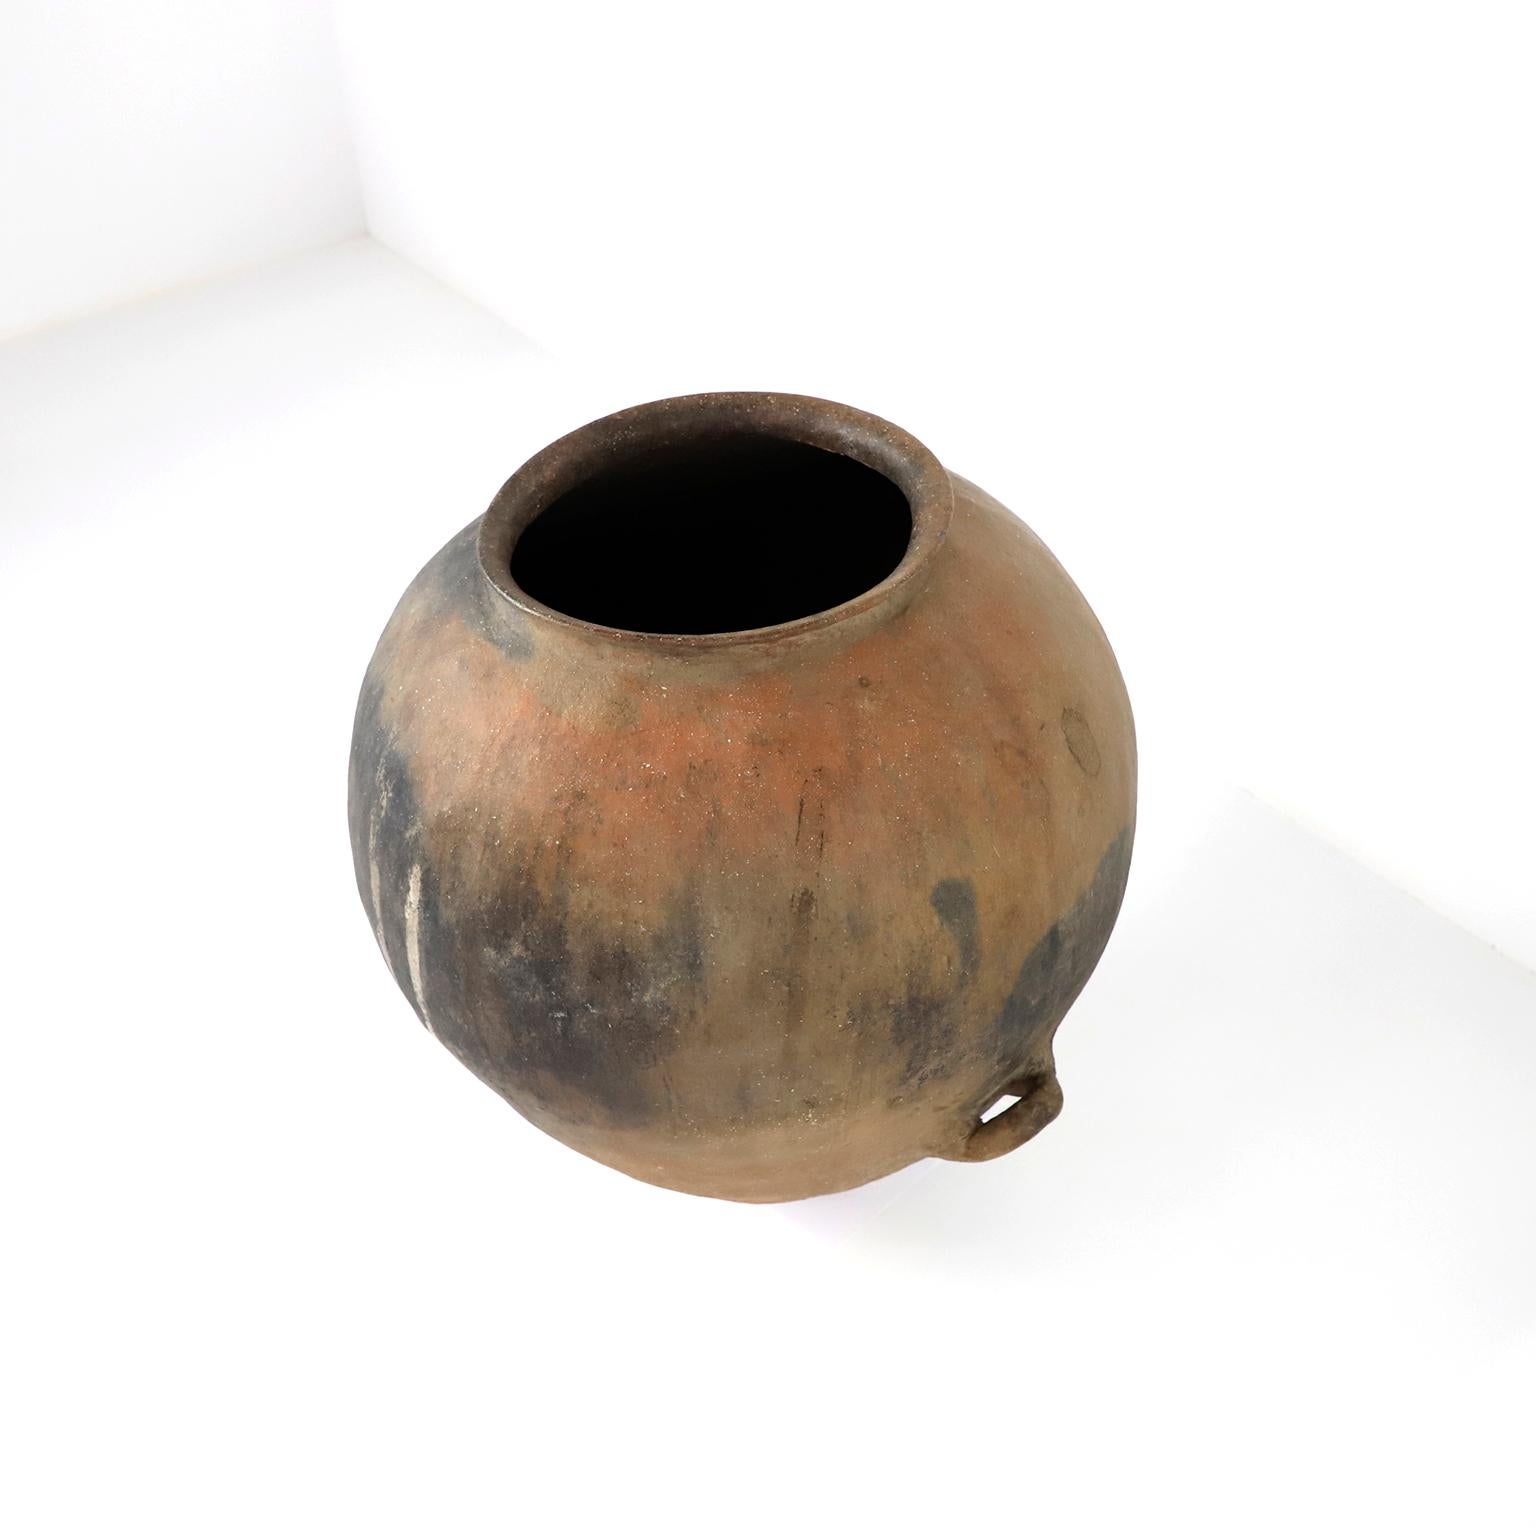 Circa 1940, We offer this fantastic ancient barro pot from Mexico, made in Puebla México hand crafted. This style of pottery is very rare, originally used for storing water from nearby rivers.